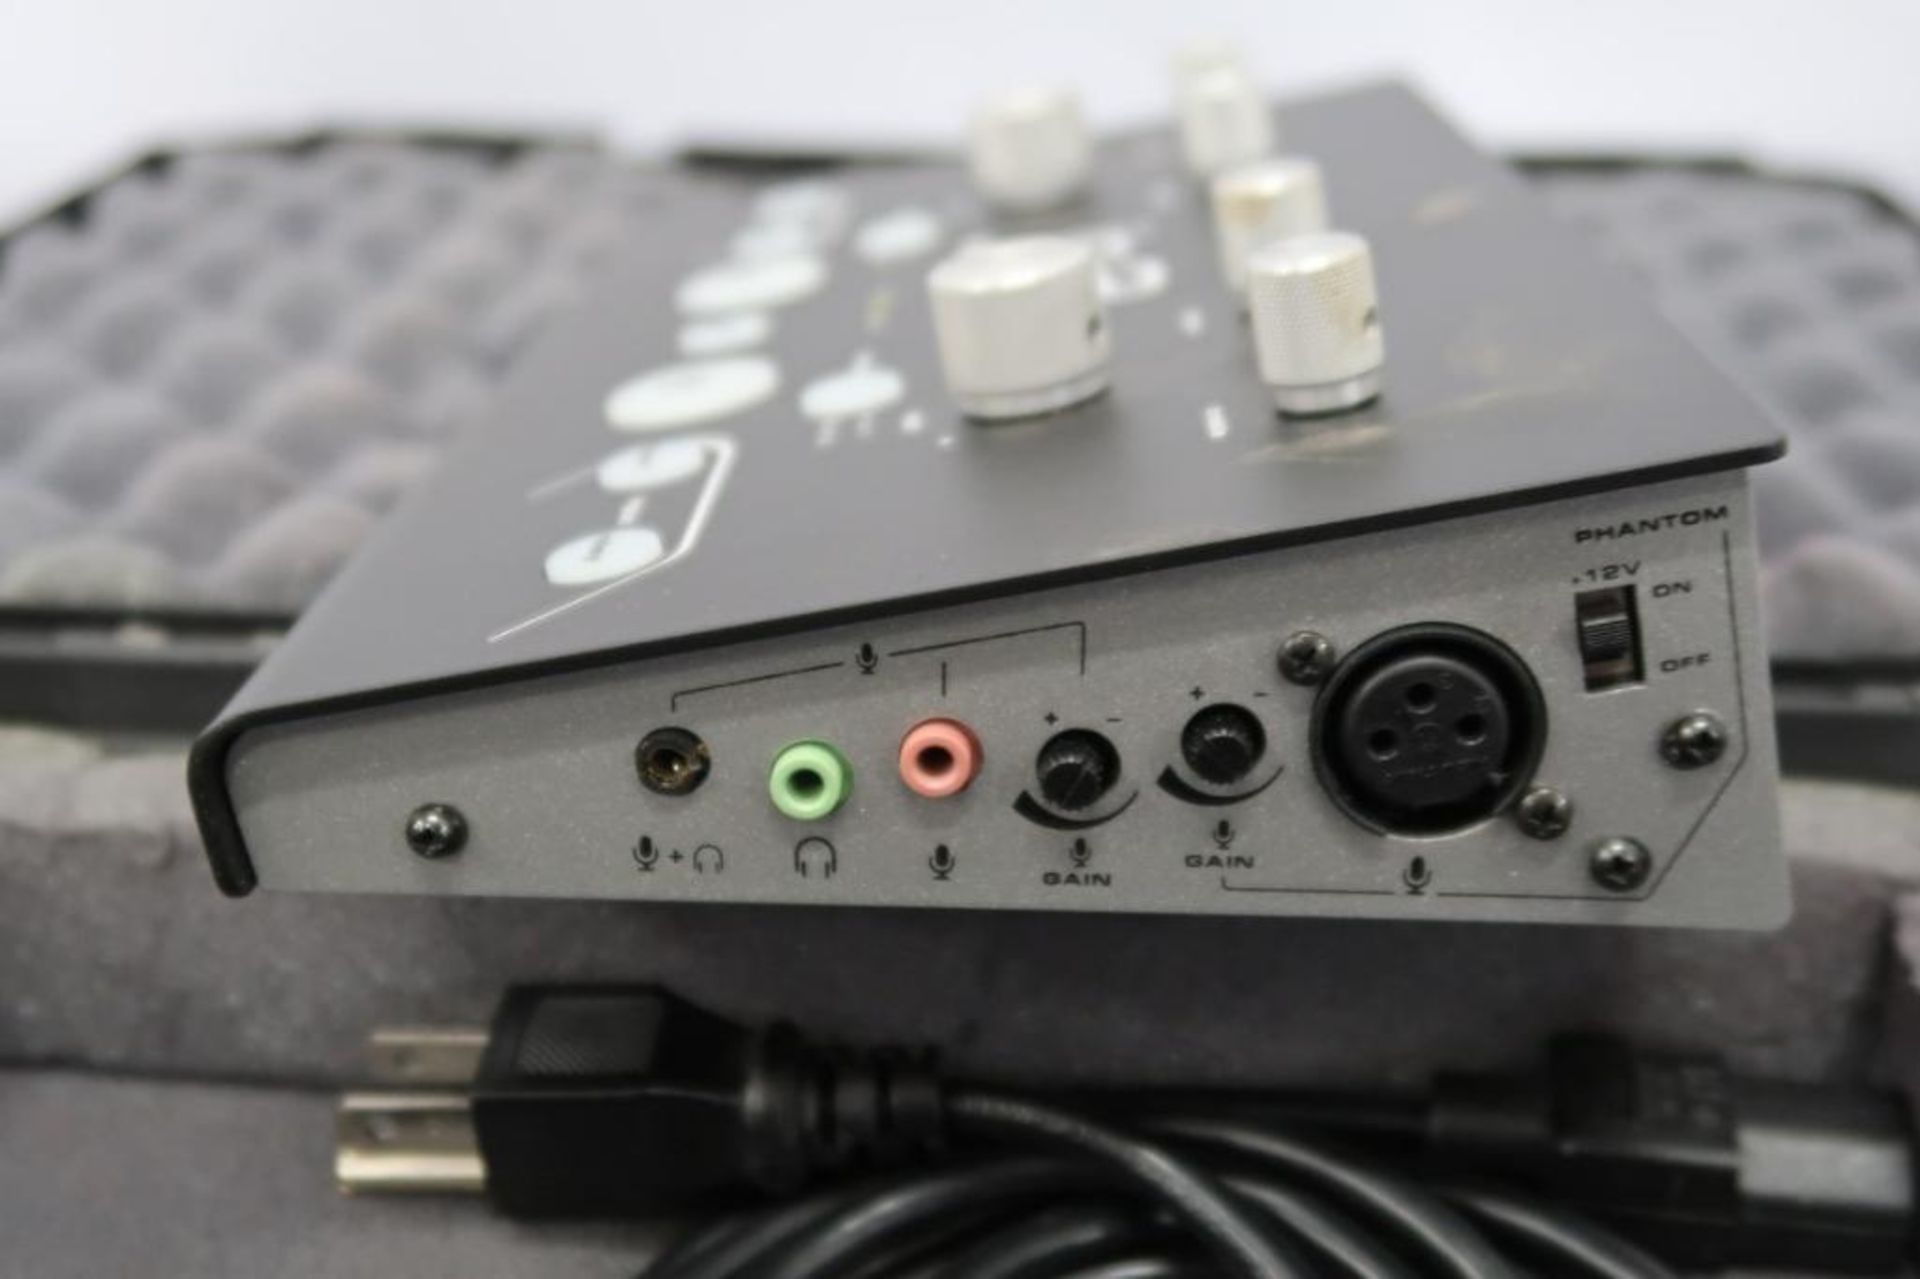 Williams Sound IC-2 Inerpreter Control Console with Doskocil Hard Plastic Case - Image 6 of 6